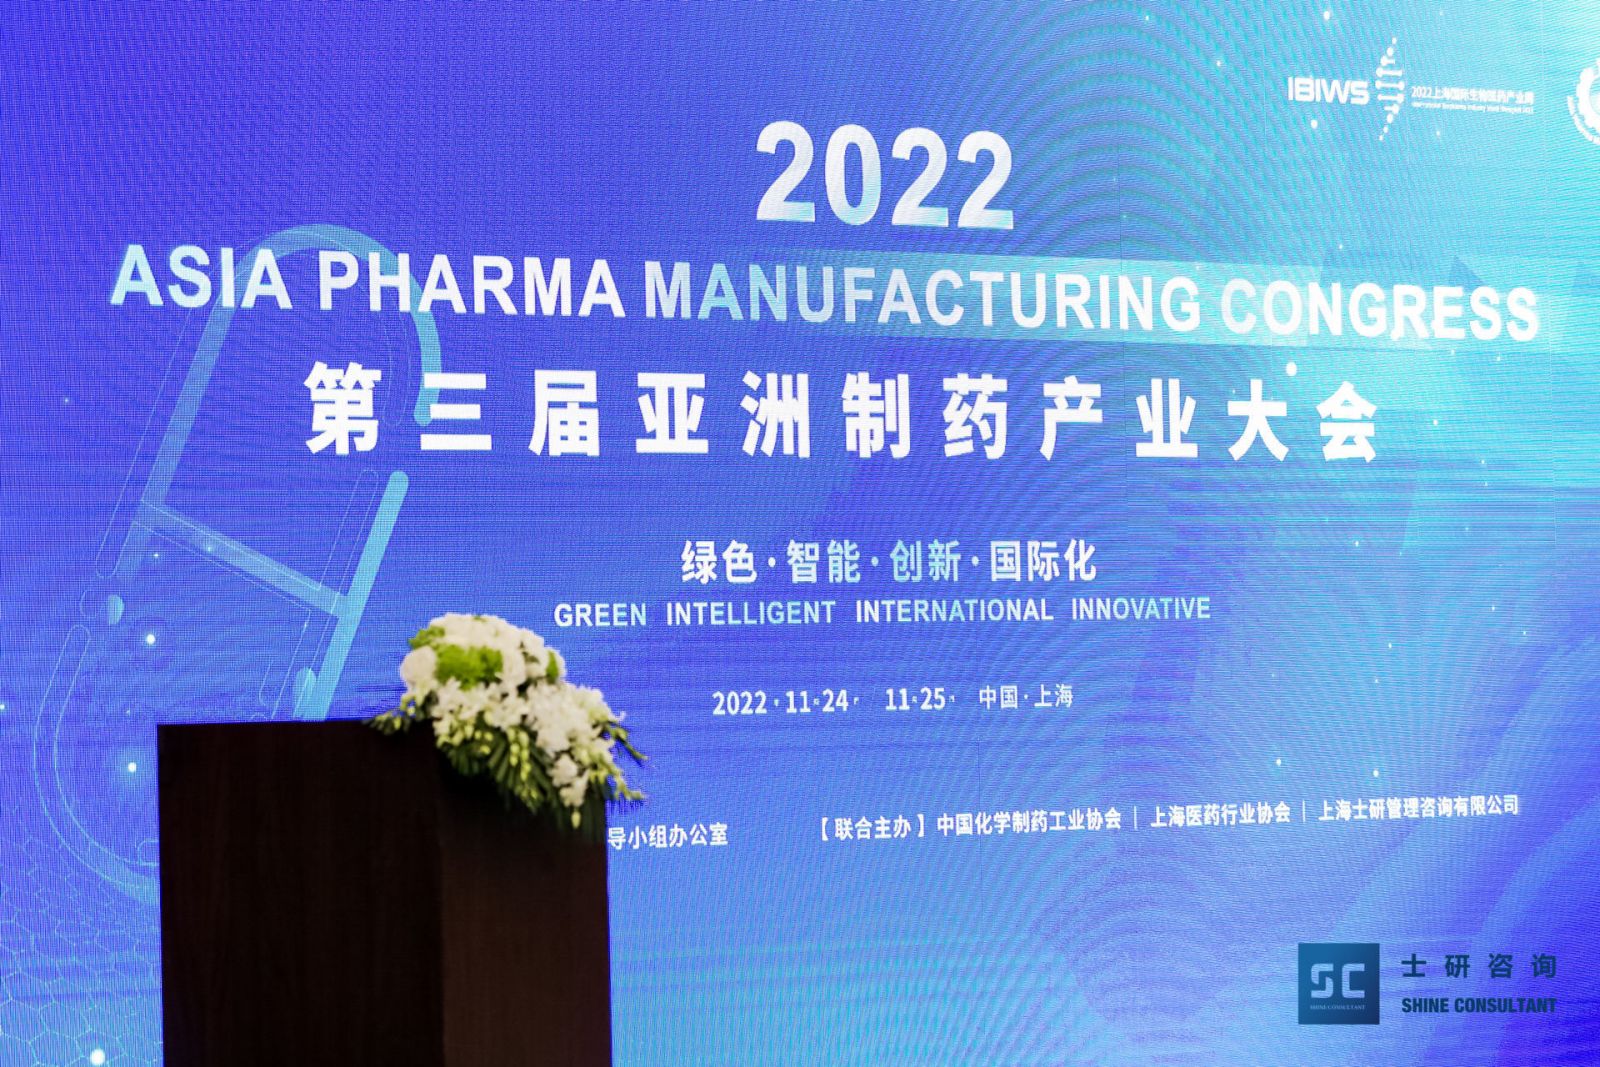 2022 3rd Asian Pharma Manufacturing Congress was Successfully Held in Shanghai